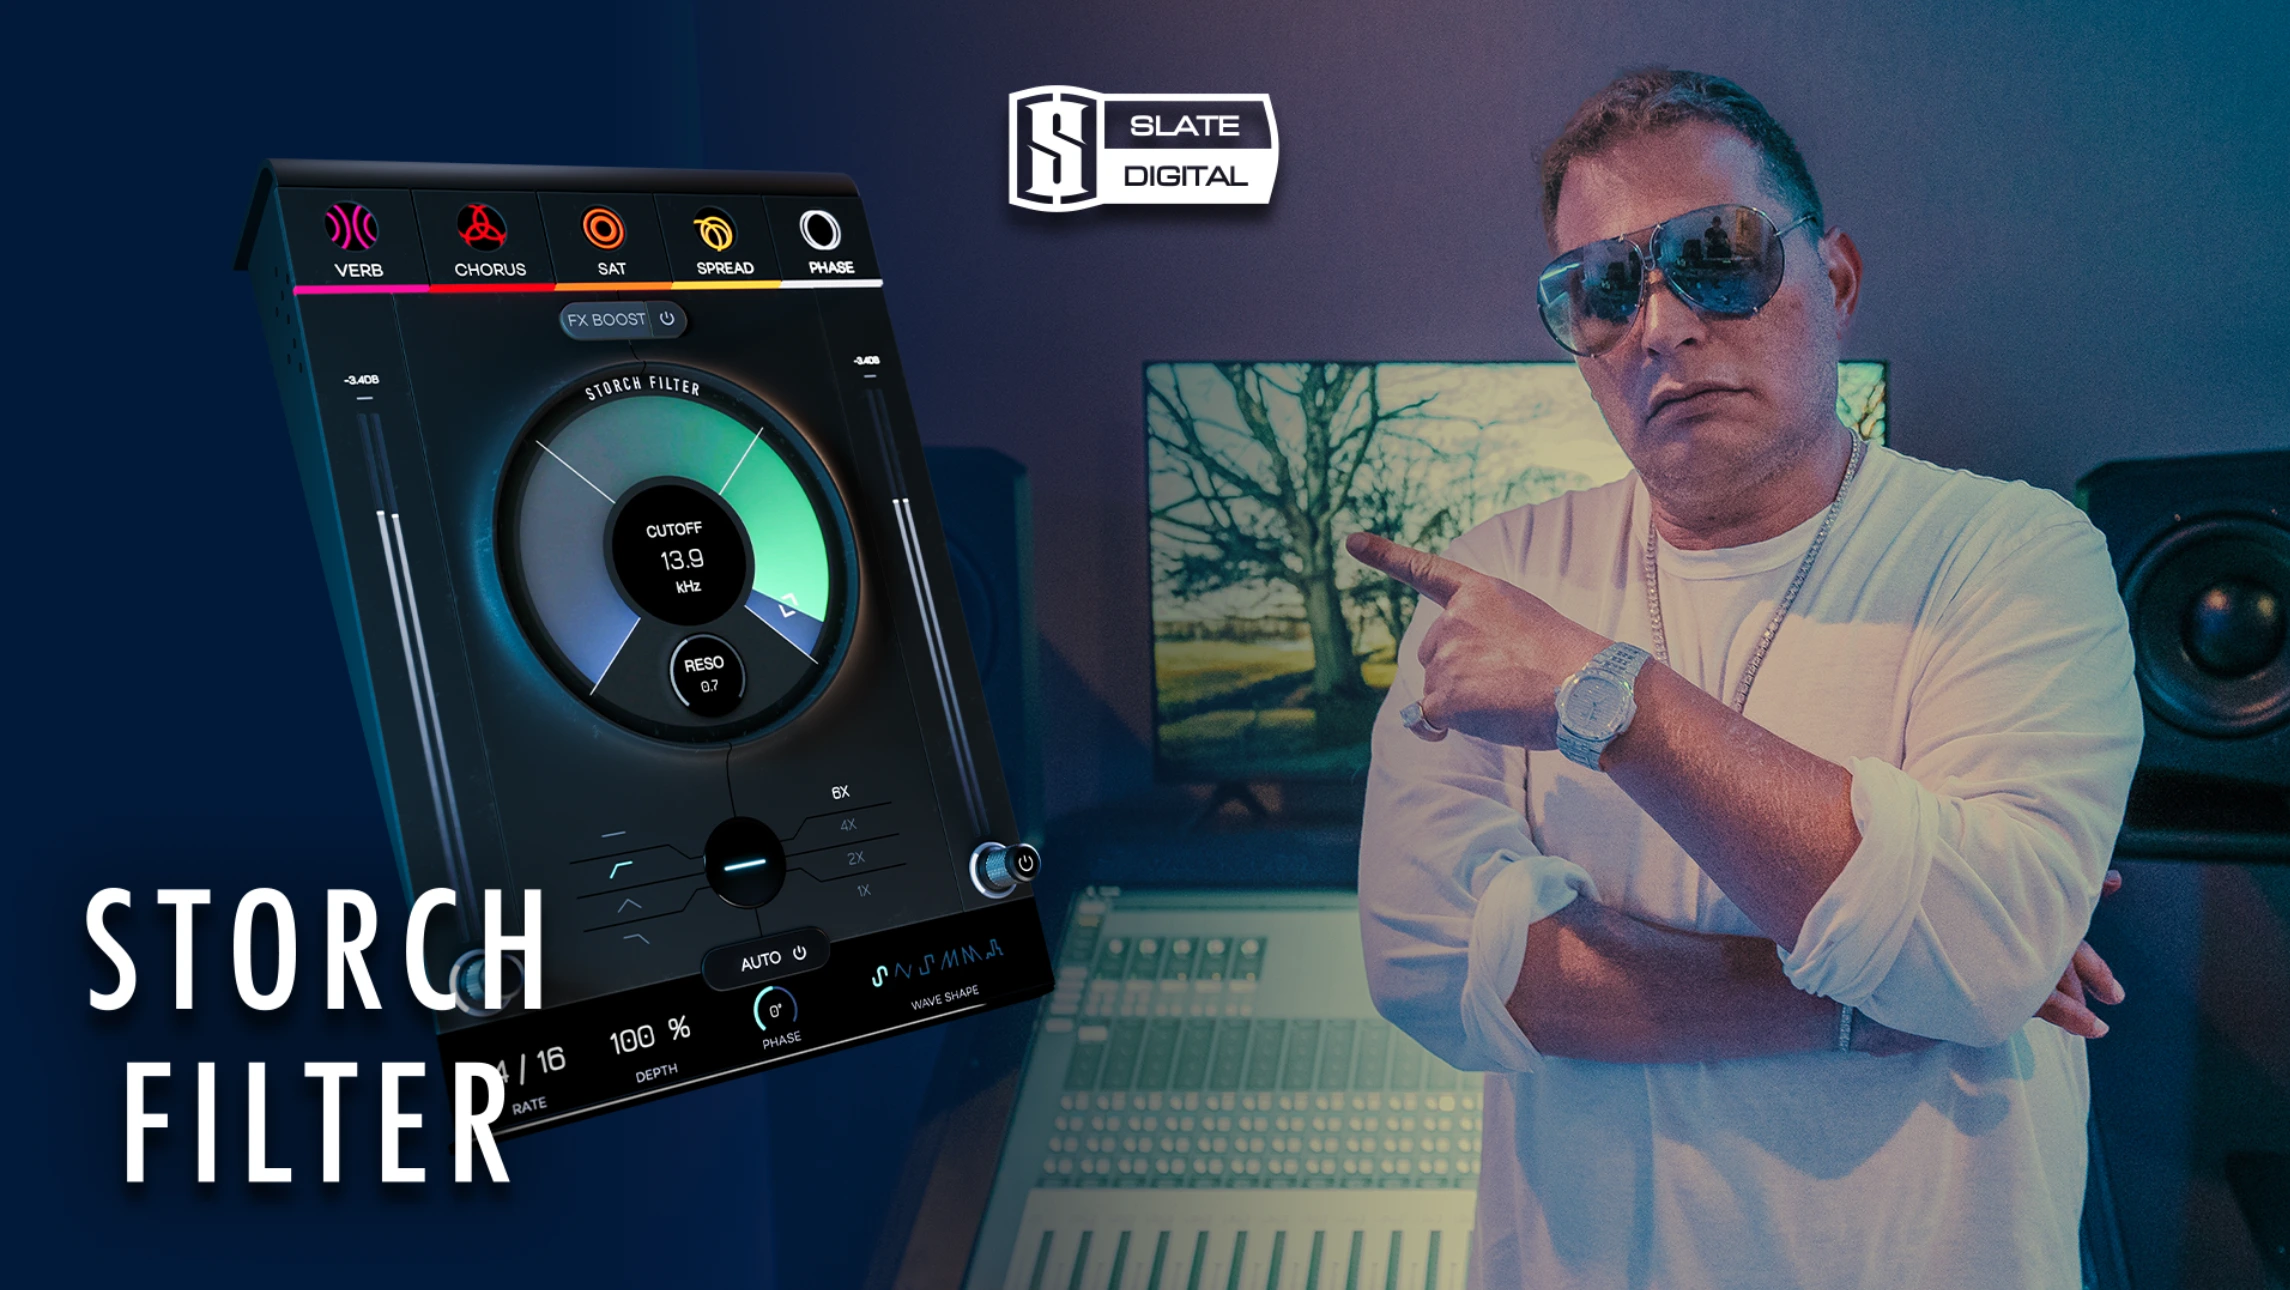 Slate Digital Joins Forces With Scott Storch for New ‘Storch Filter’ Plugin